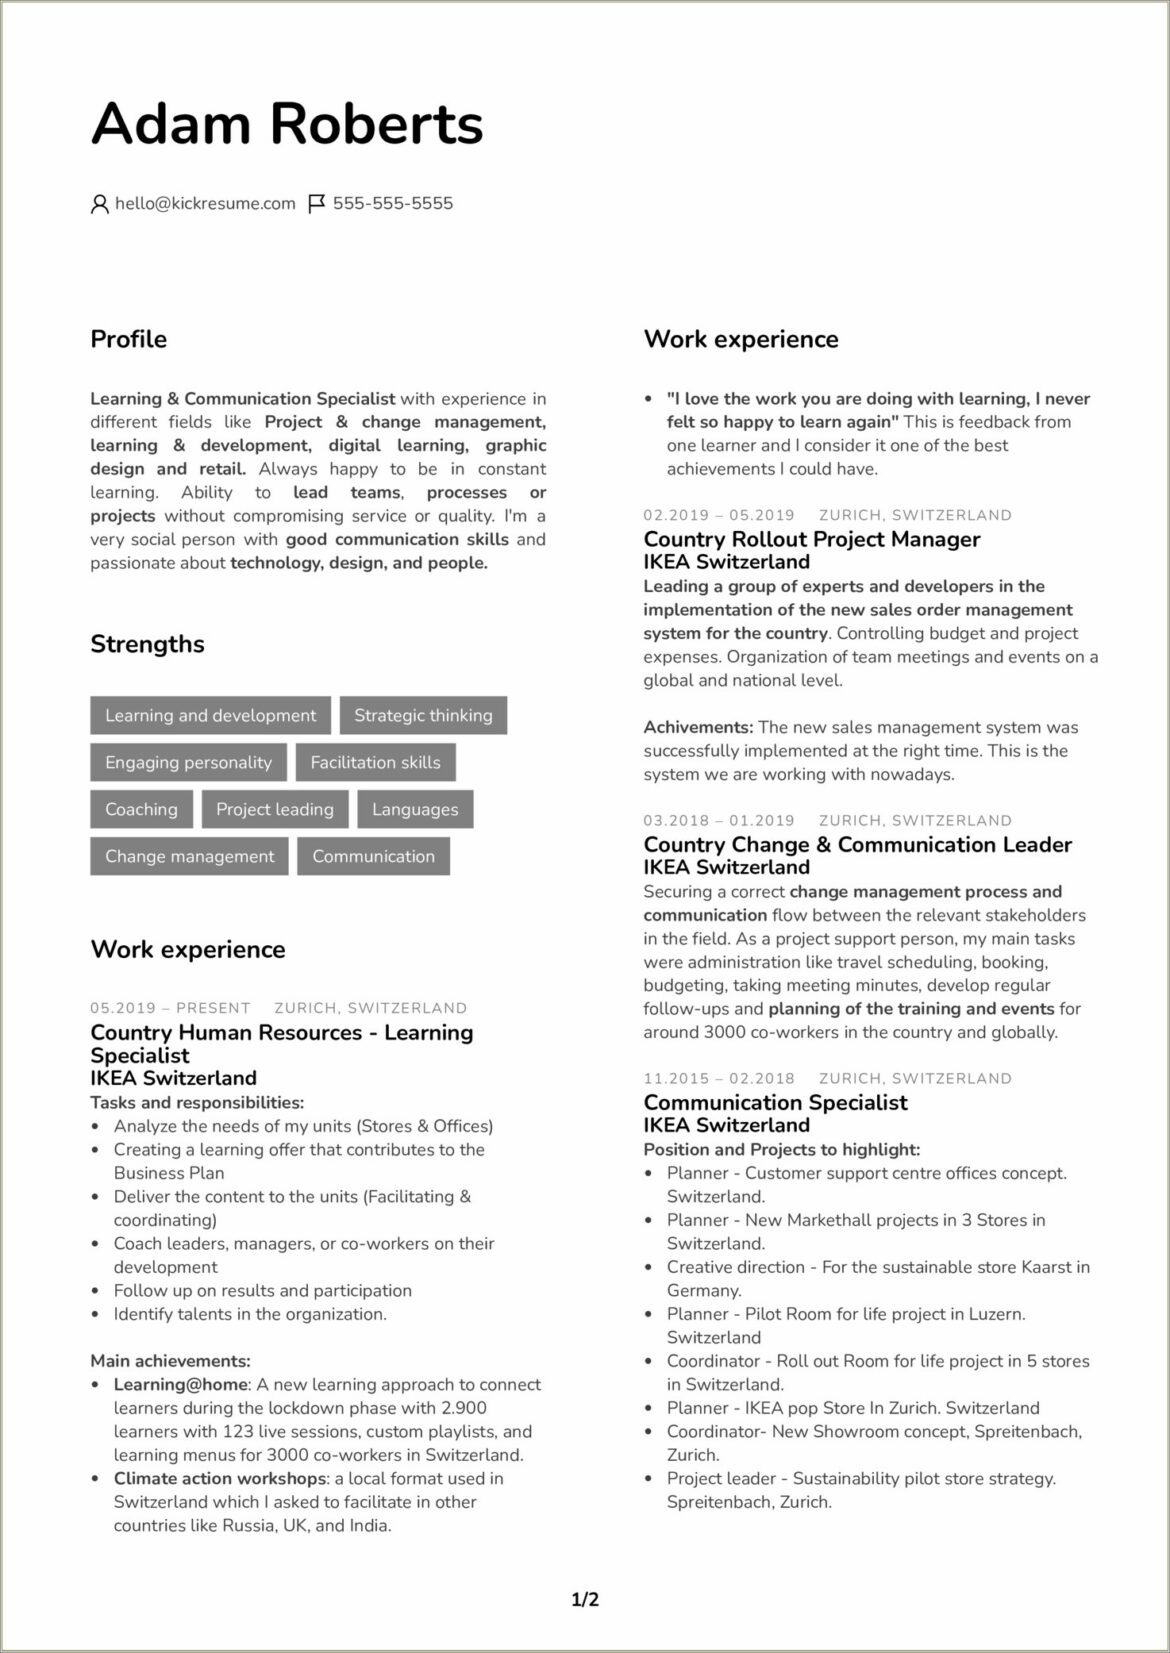 Sample Resume For Learning And Development Specialist